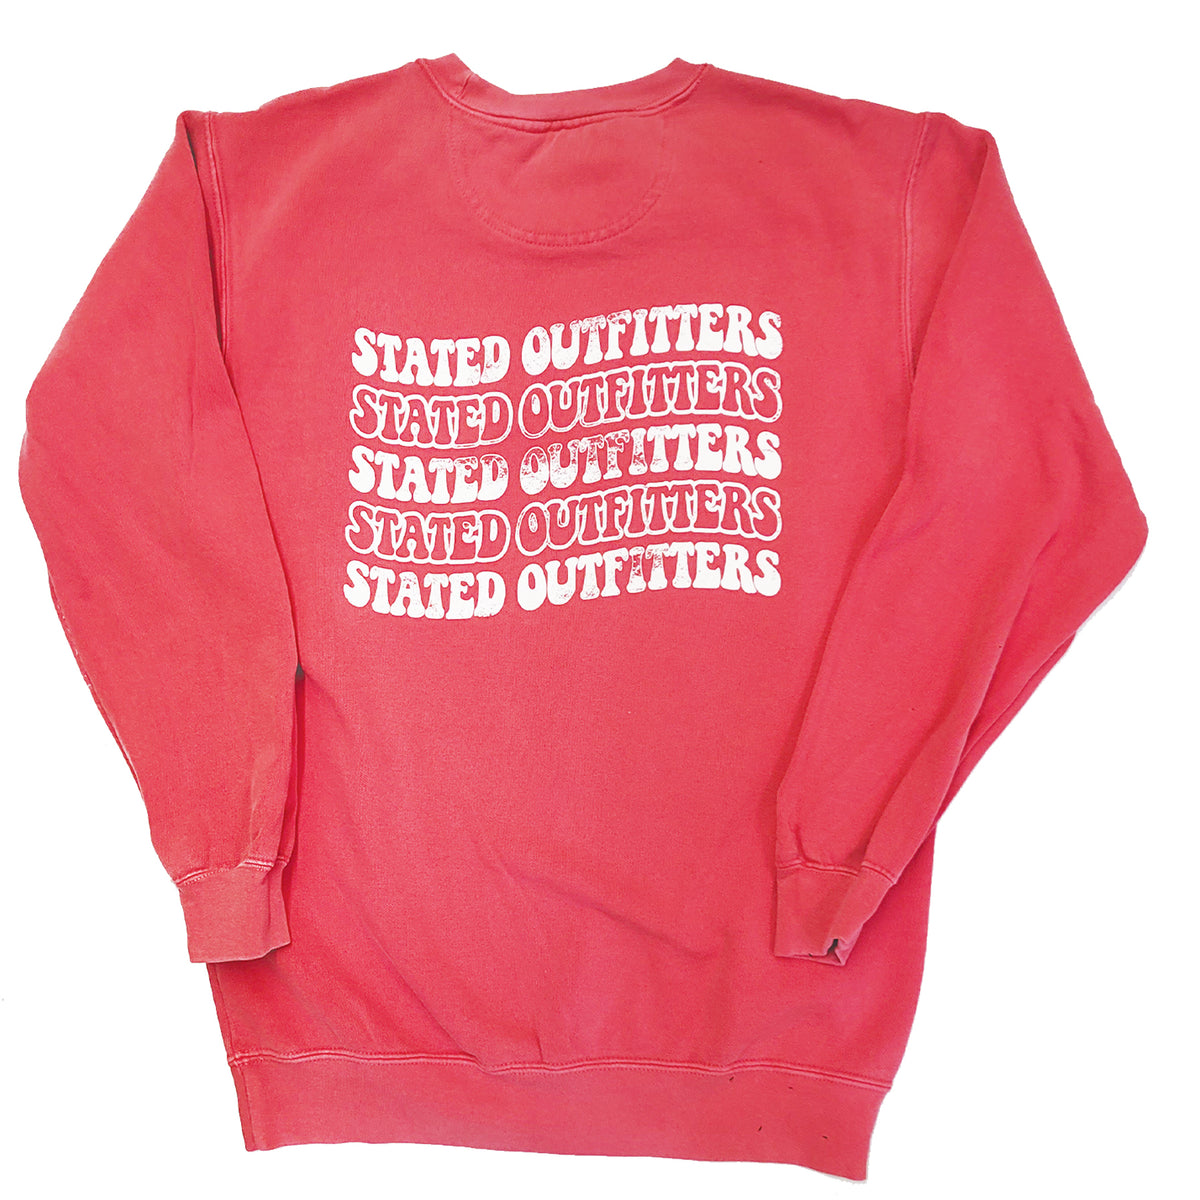 Stated Outfitters Wavy Sweatshirt